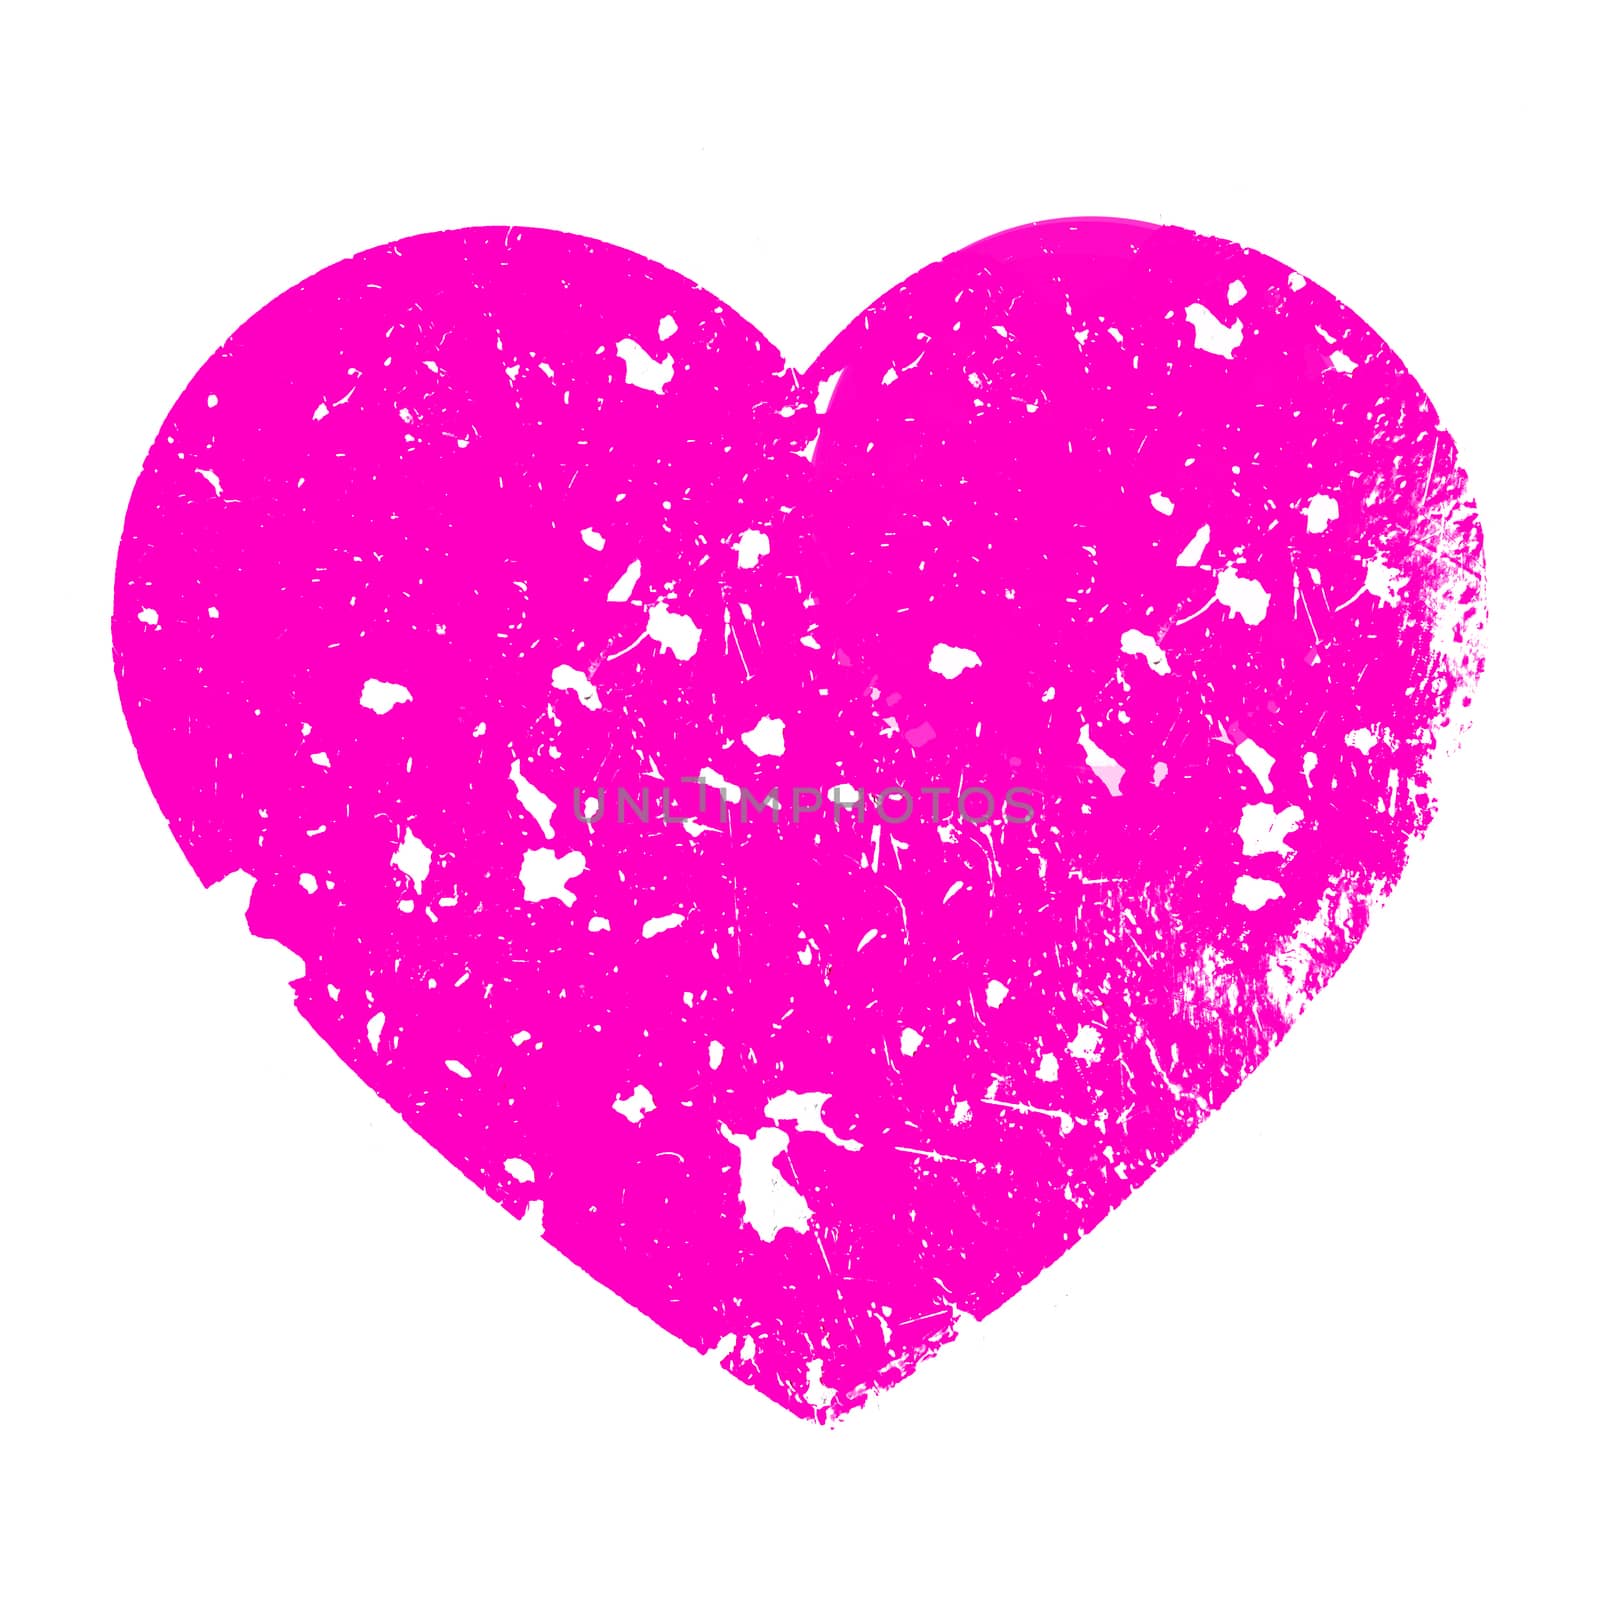 Pink grungy heart by germanopoli